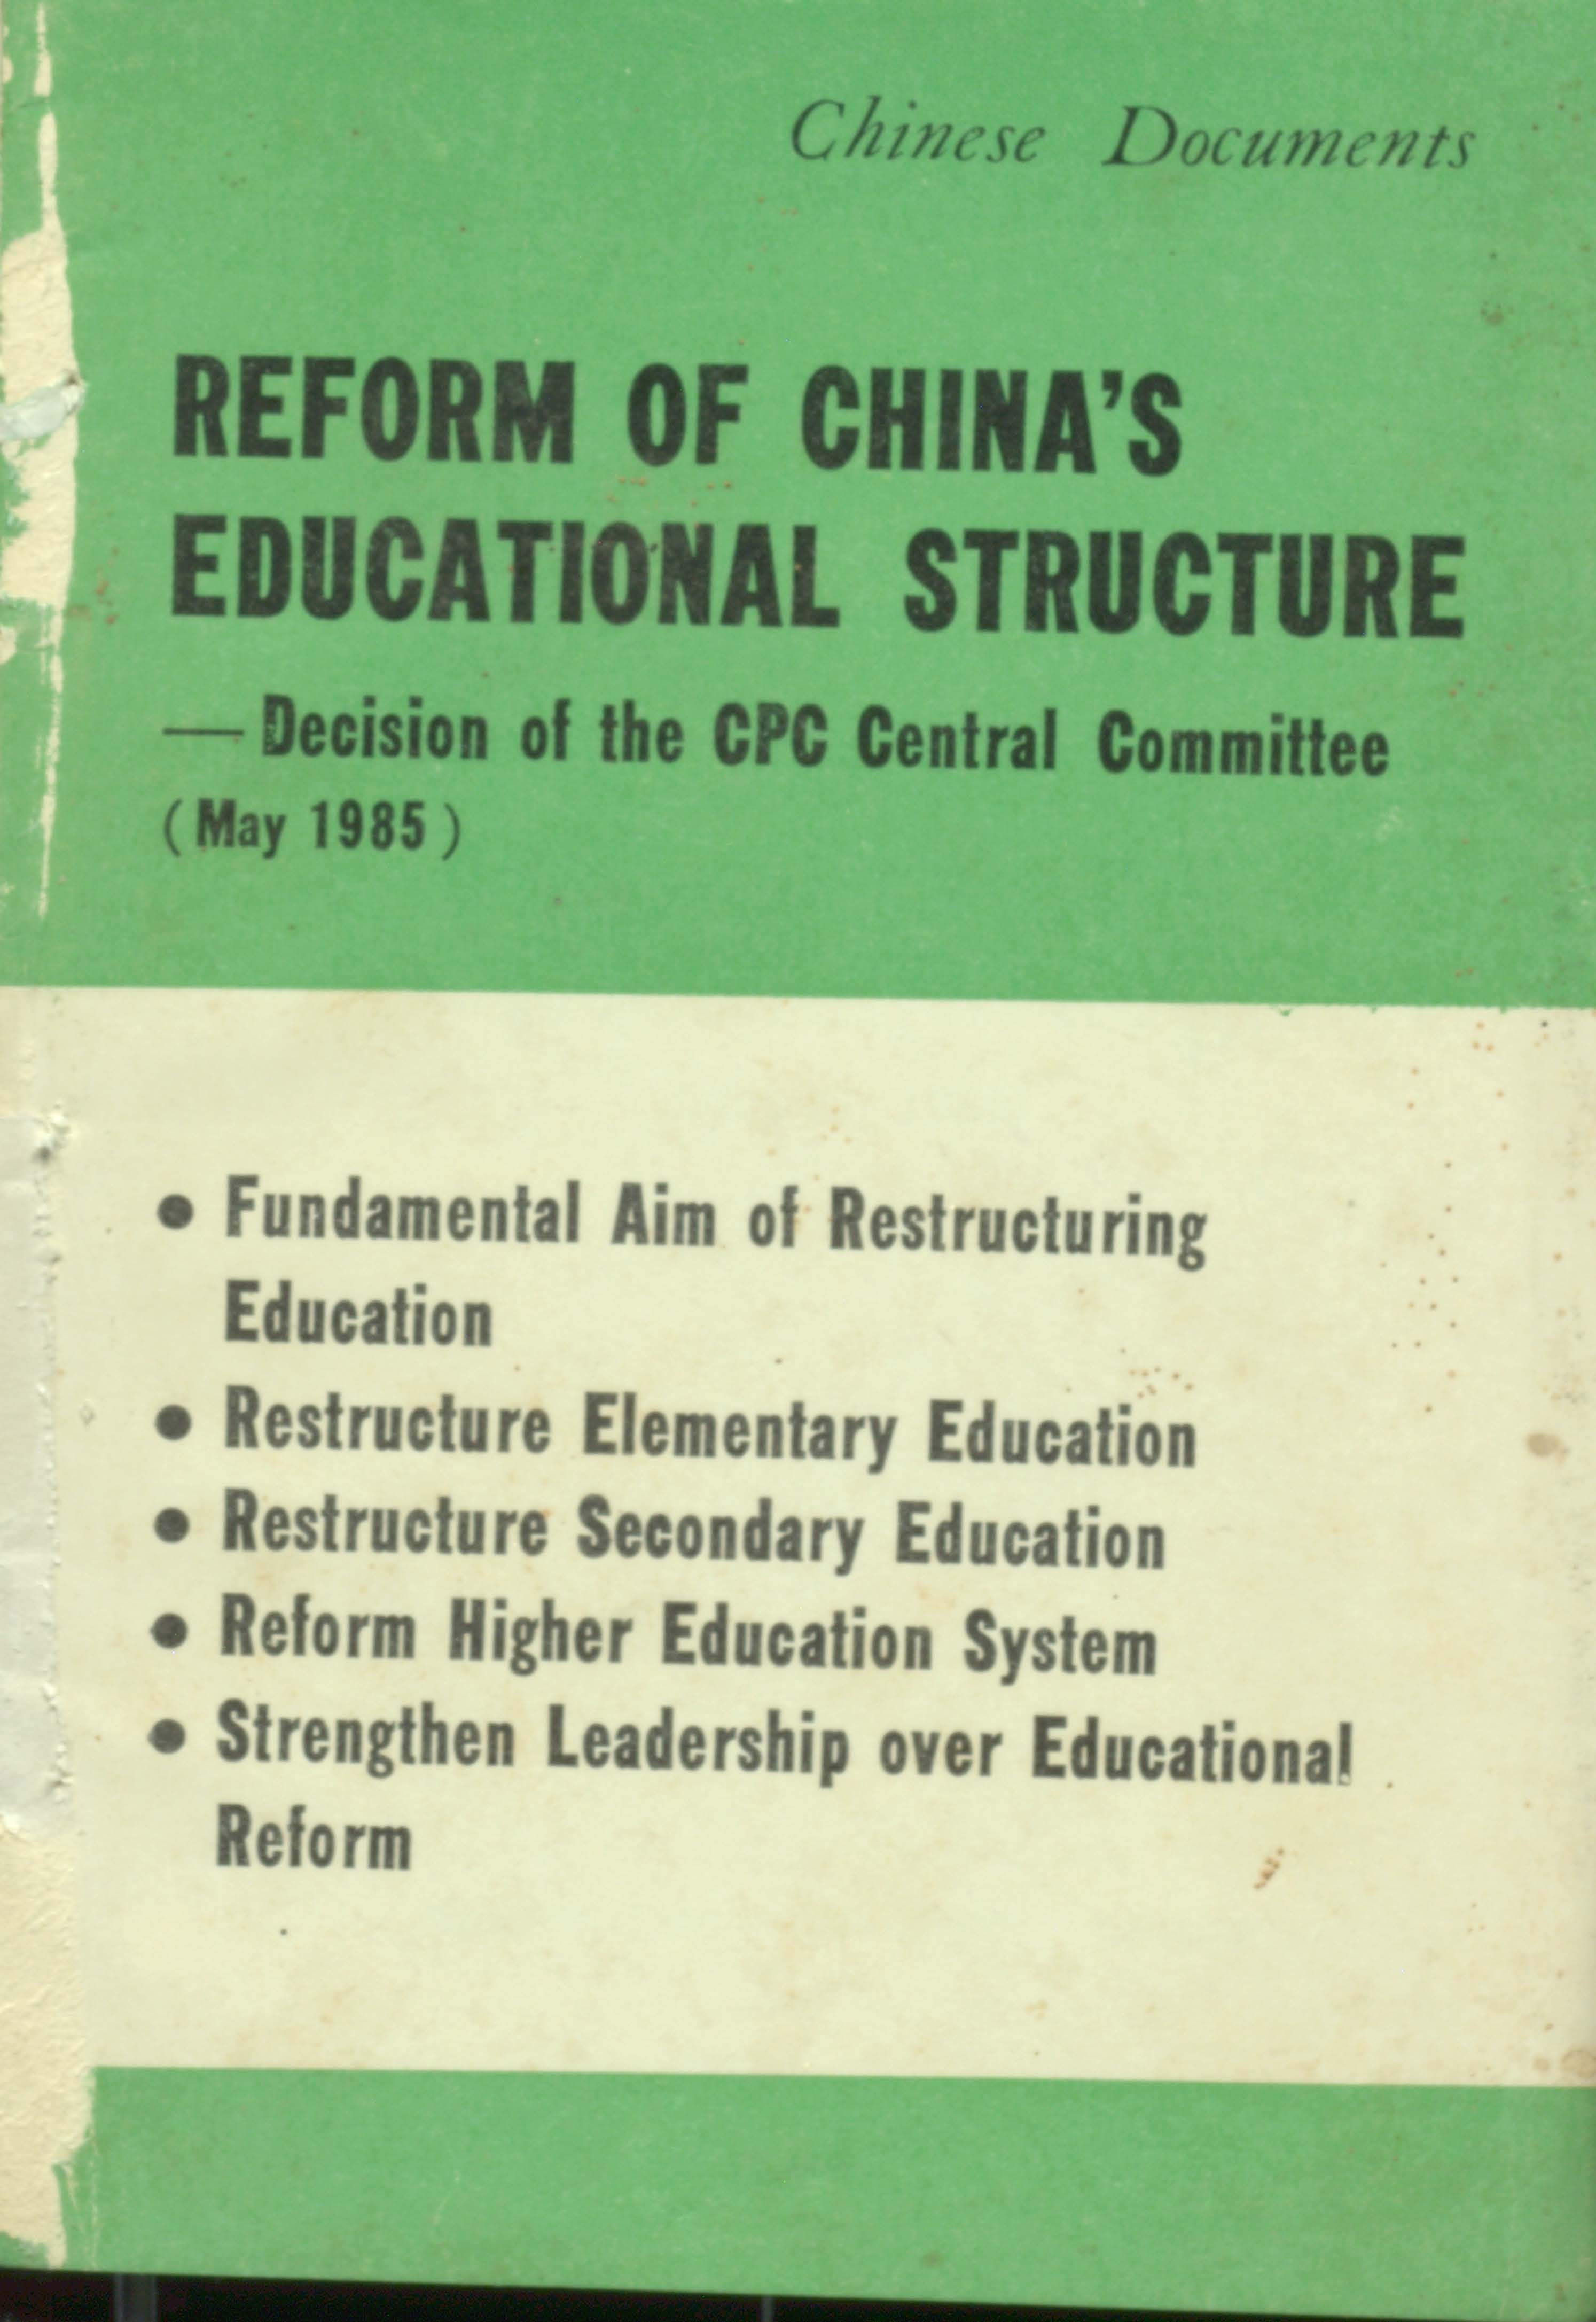 Reform of china's educational structure (decision of the CPC central committee(may 1985)  